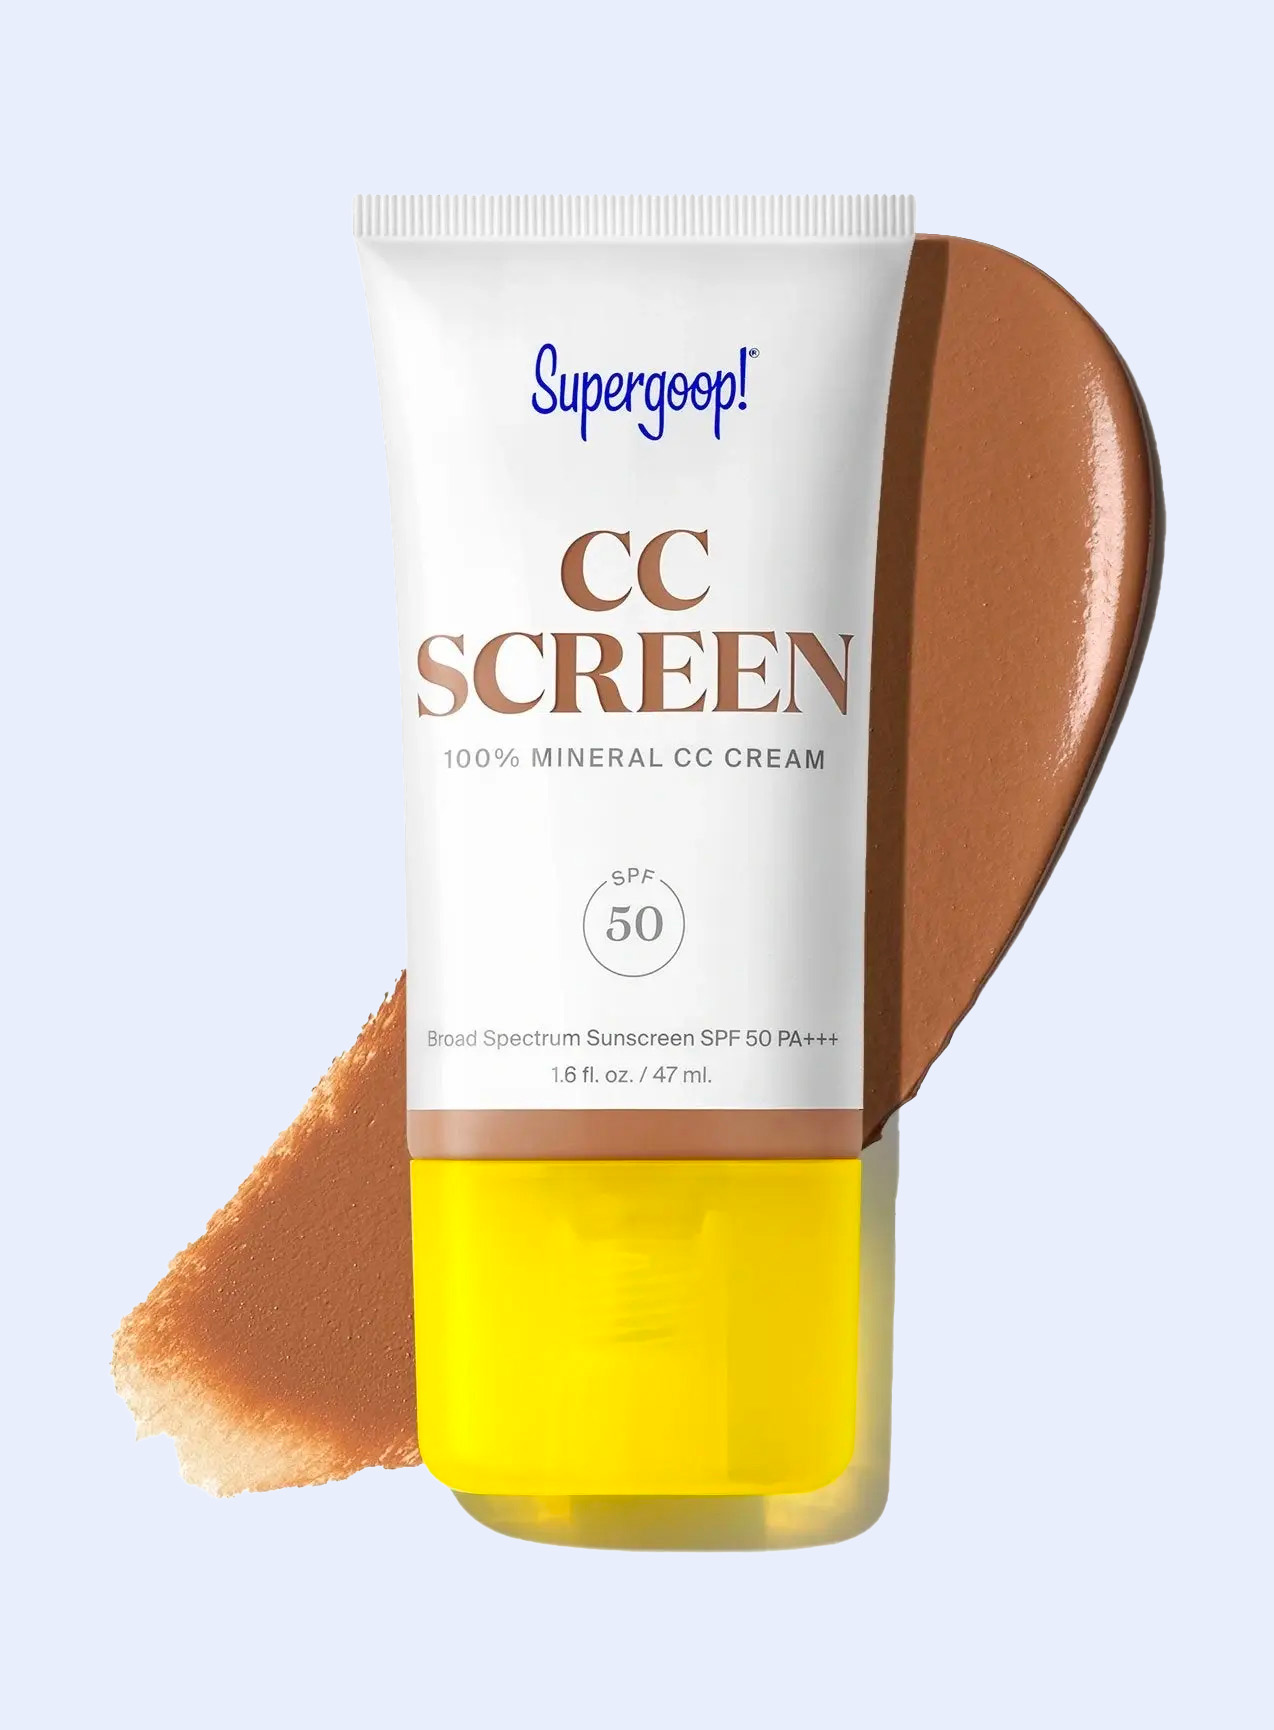 A shot of the CC cream on top of a sample of the product itself.